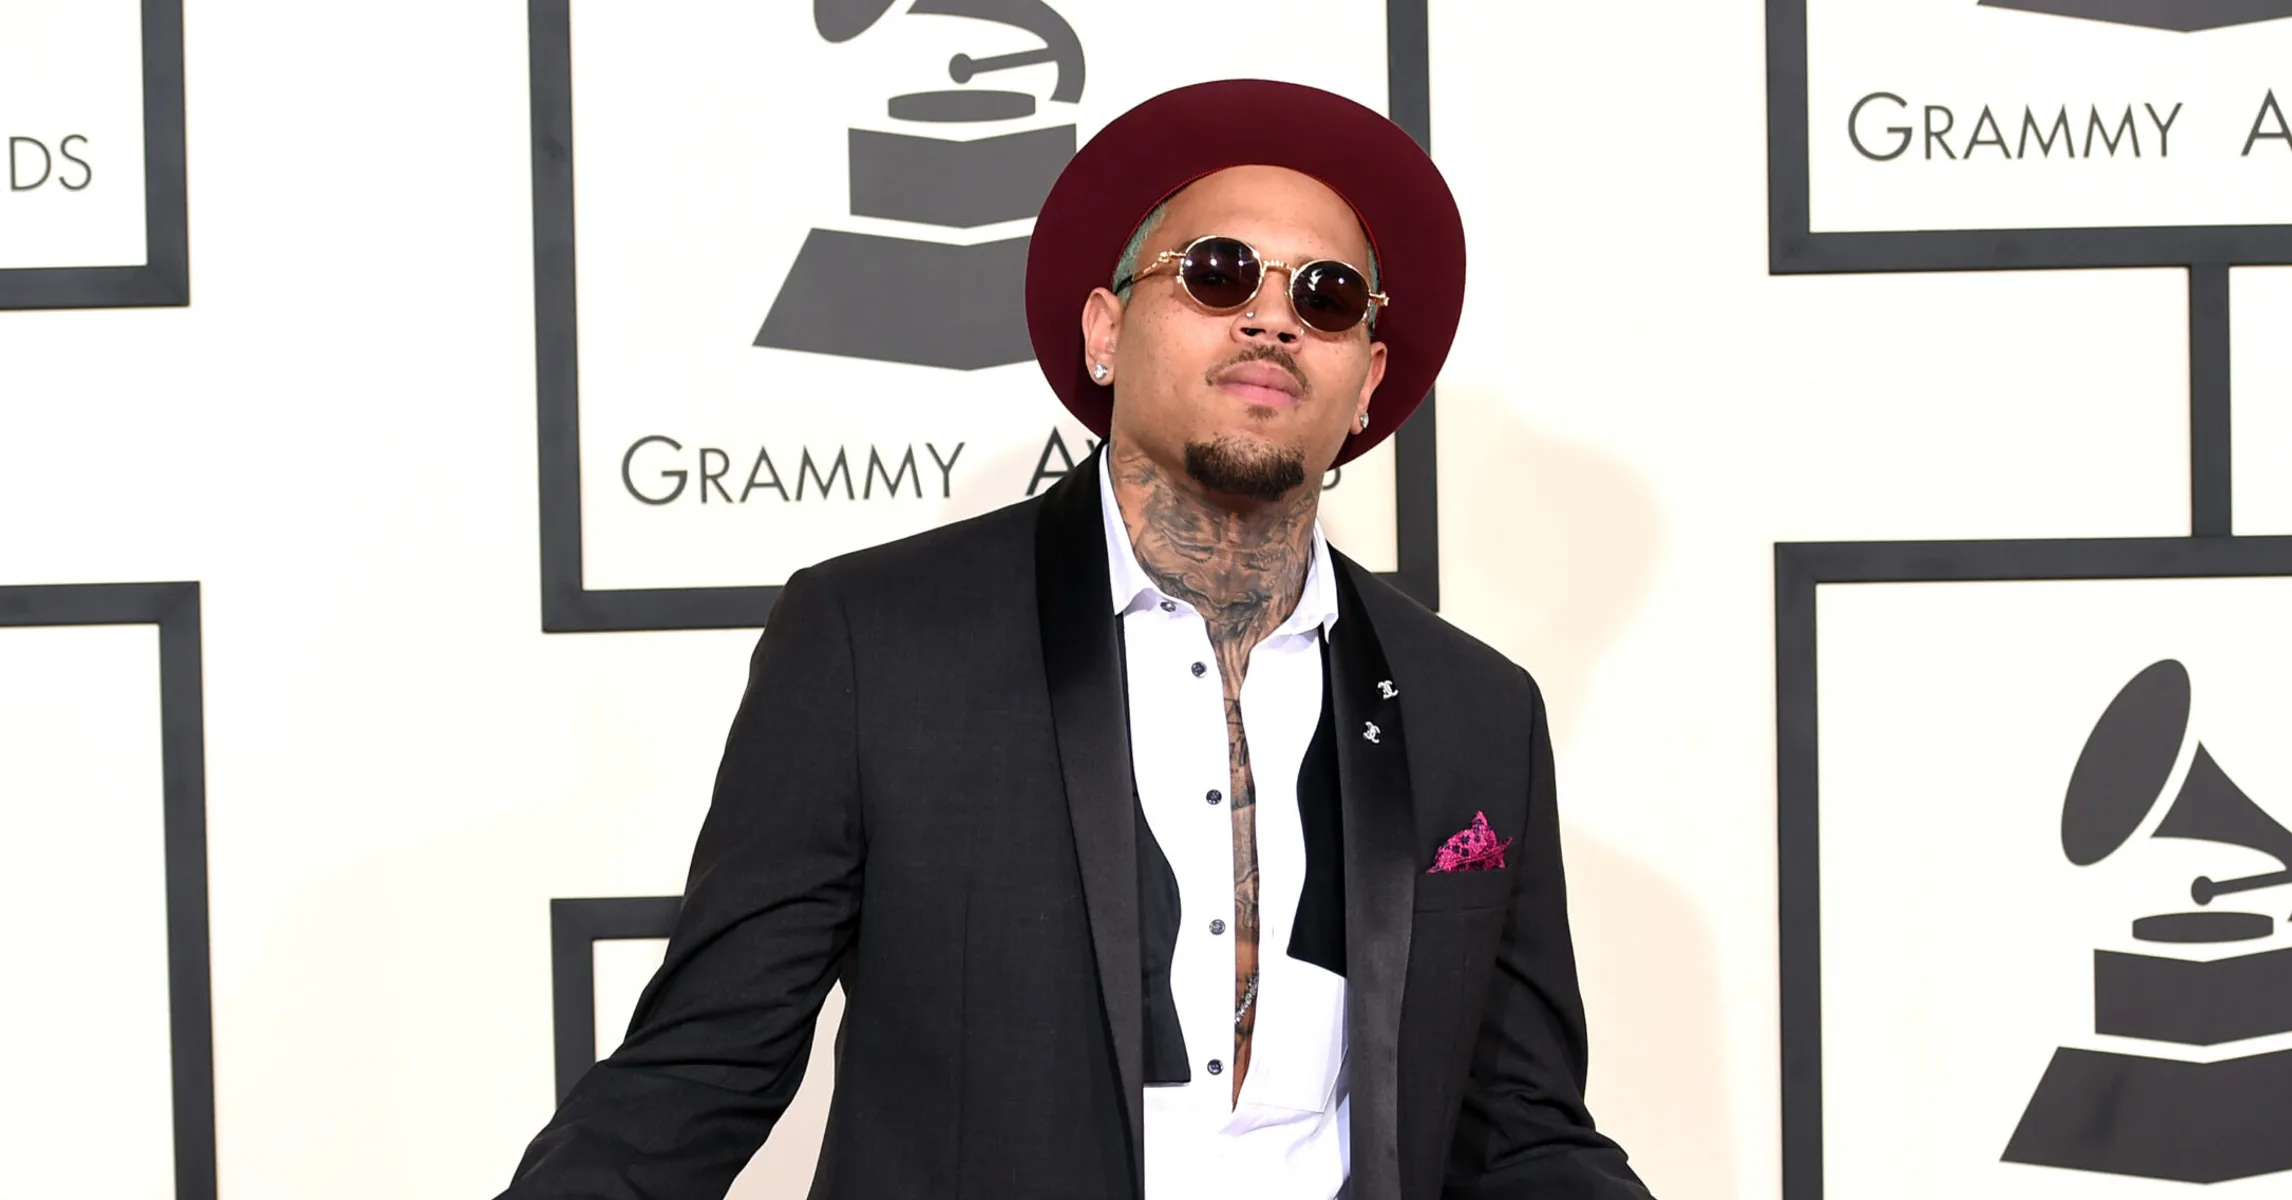 Chris Brown and his BM Diamond apparently exchange “I love you” in the club